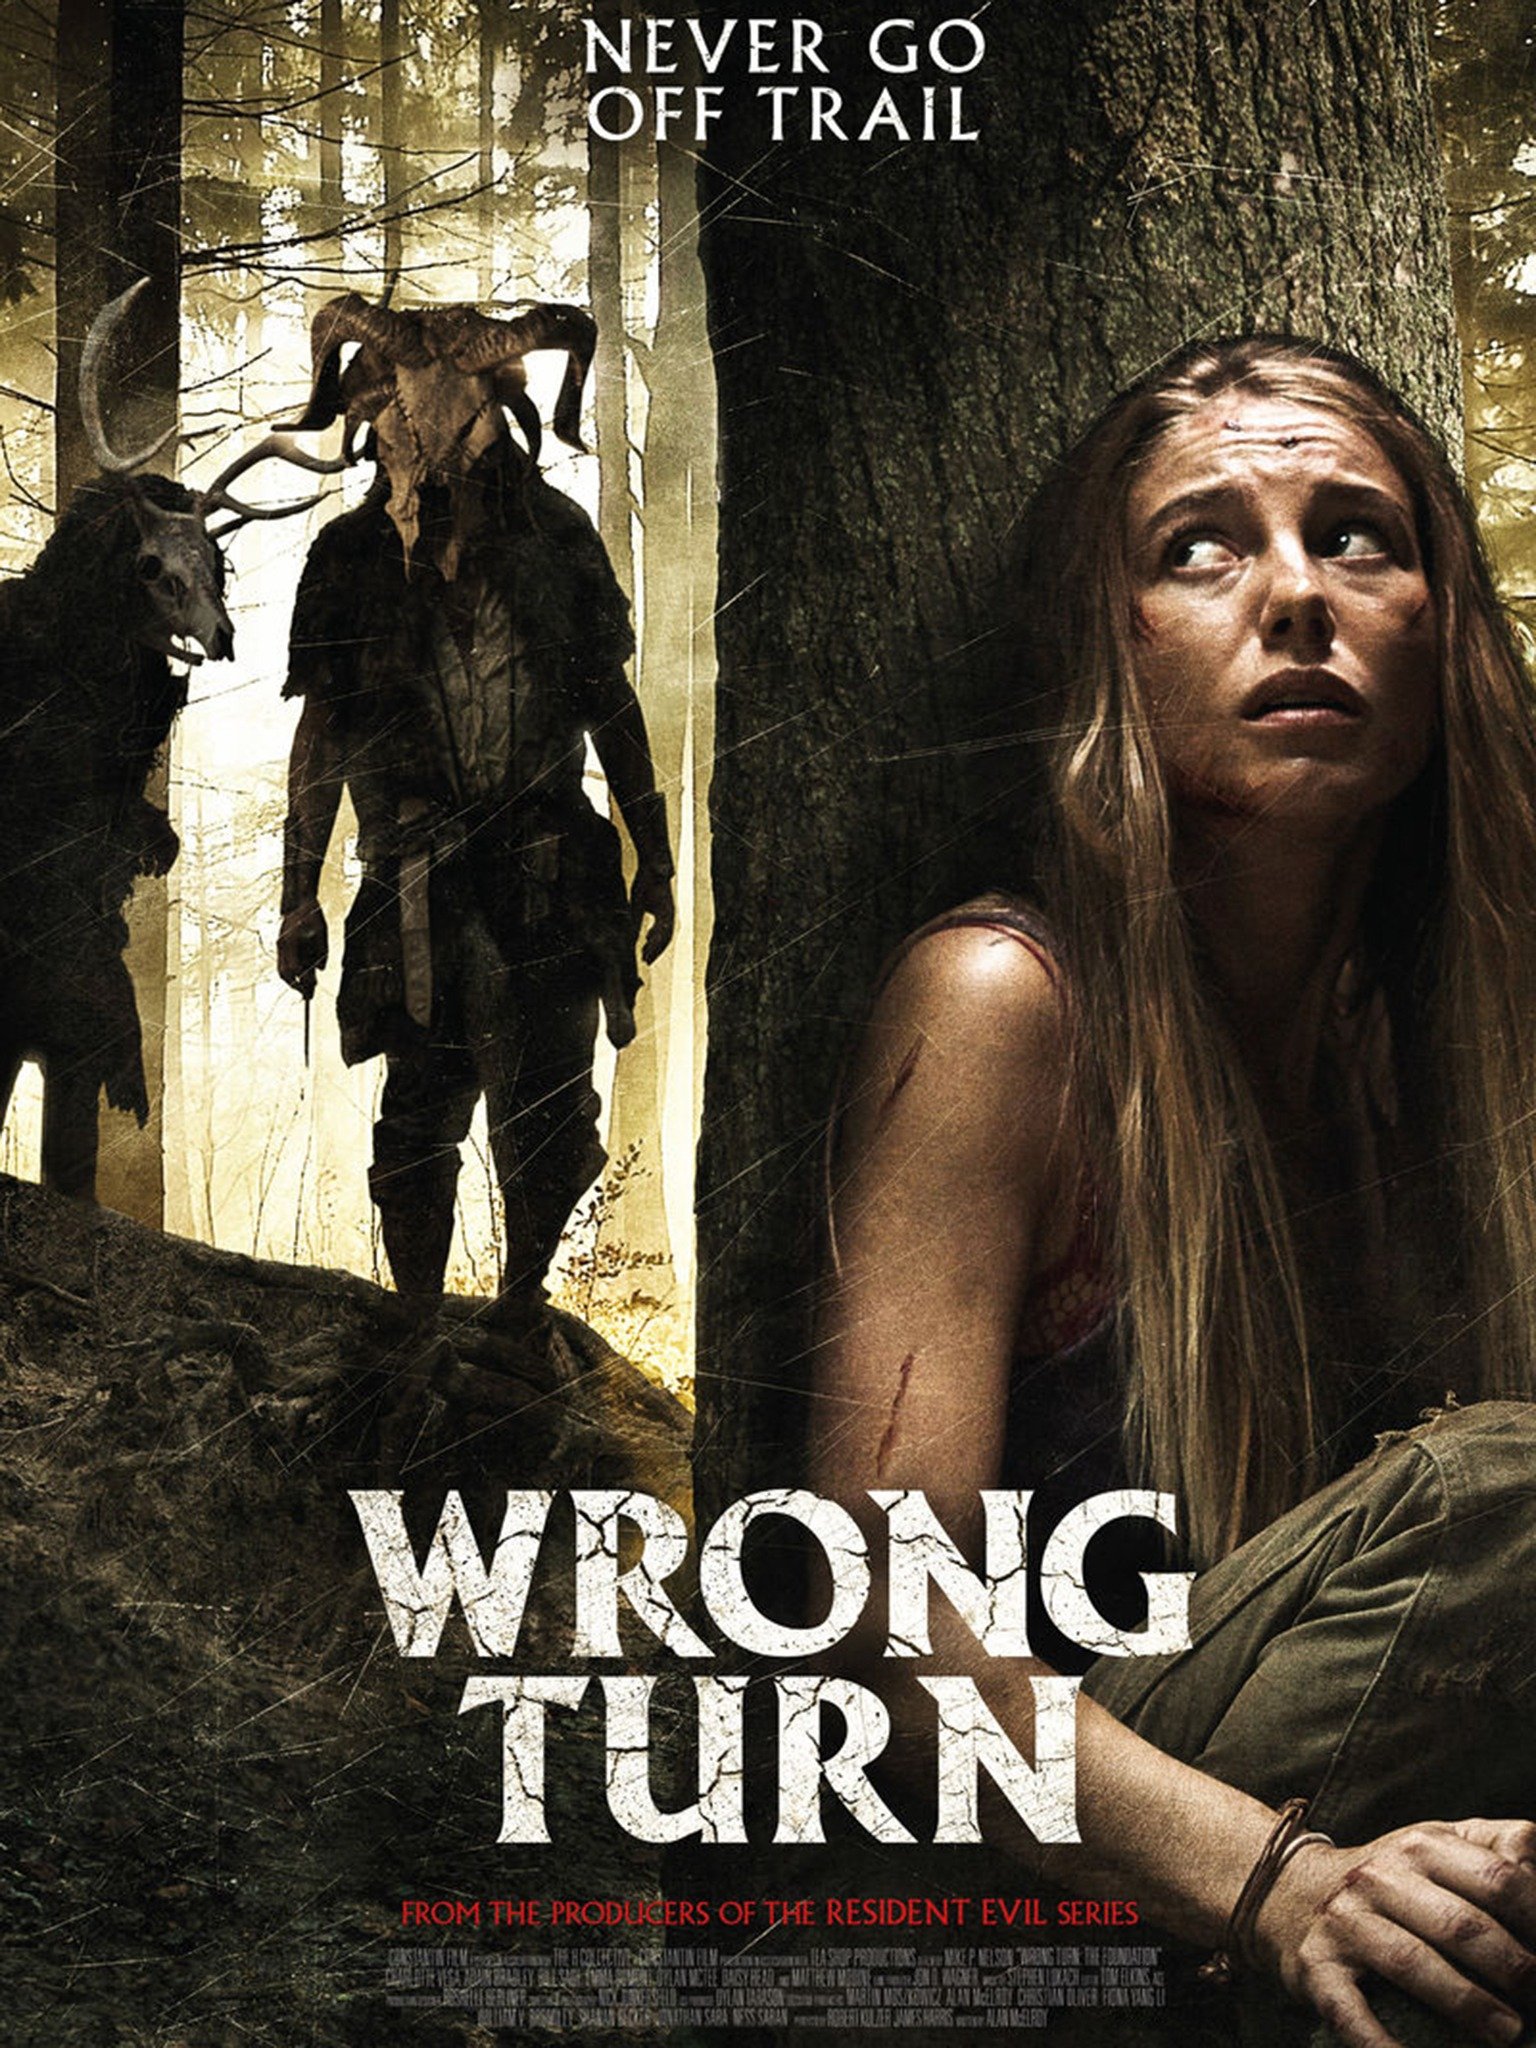 Wrong Turn Trailer 1 Trailers & Videos Rotten Tomatoes